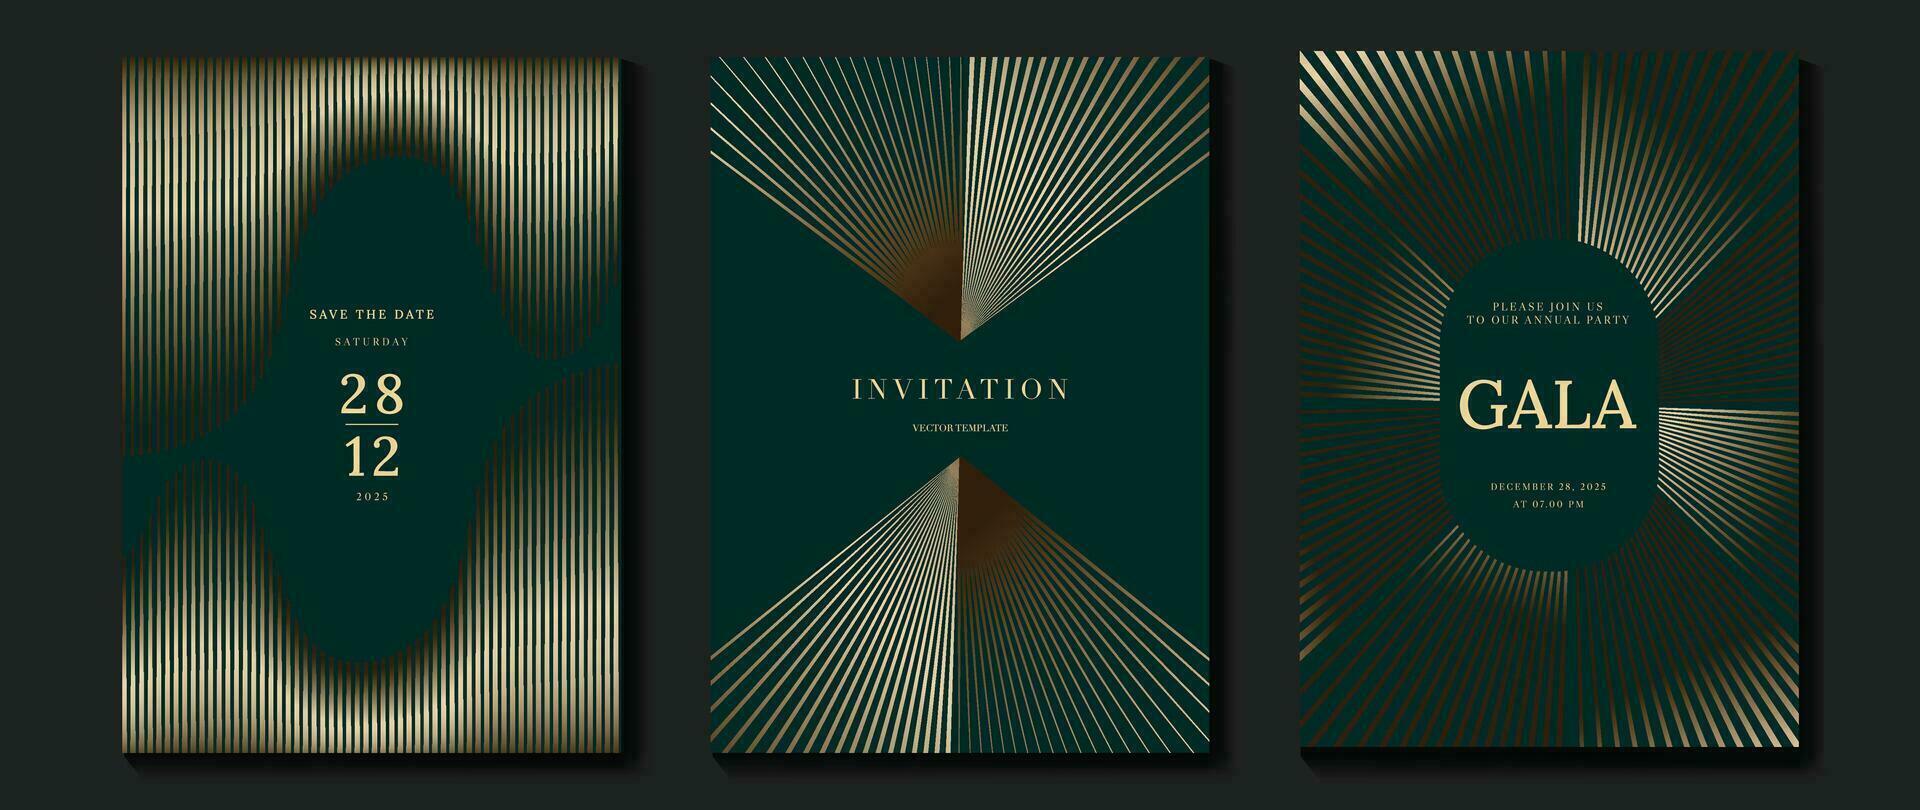 Luxury invitation card background vector. Golden curve elegant, gold line gradient on green color background. Premium design illustration for gala card, grand opening, party invitation, wedding. vector